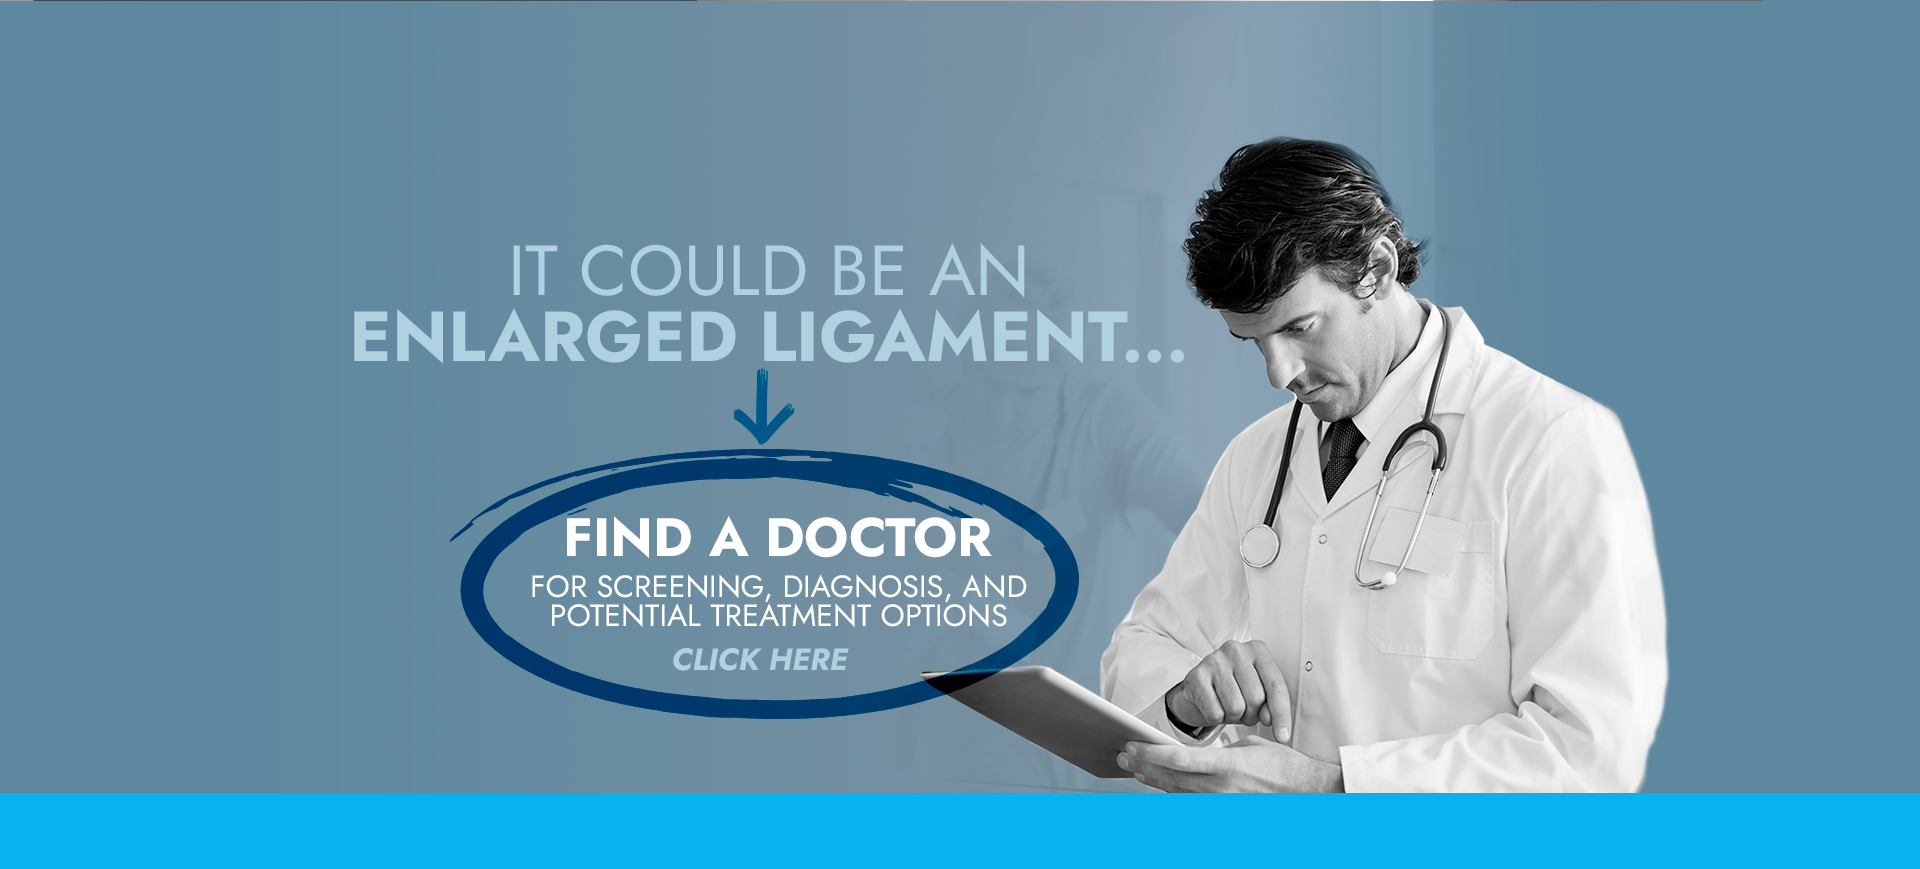 It could be an enlarged ligament...Find a doctor for screening, diagnosis, and potential treatment options. Click Here